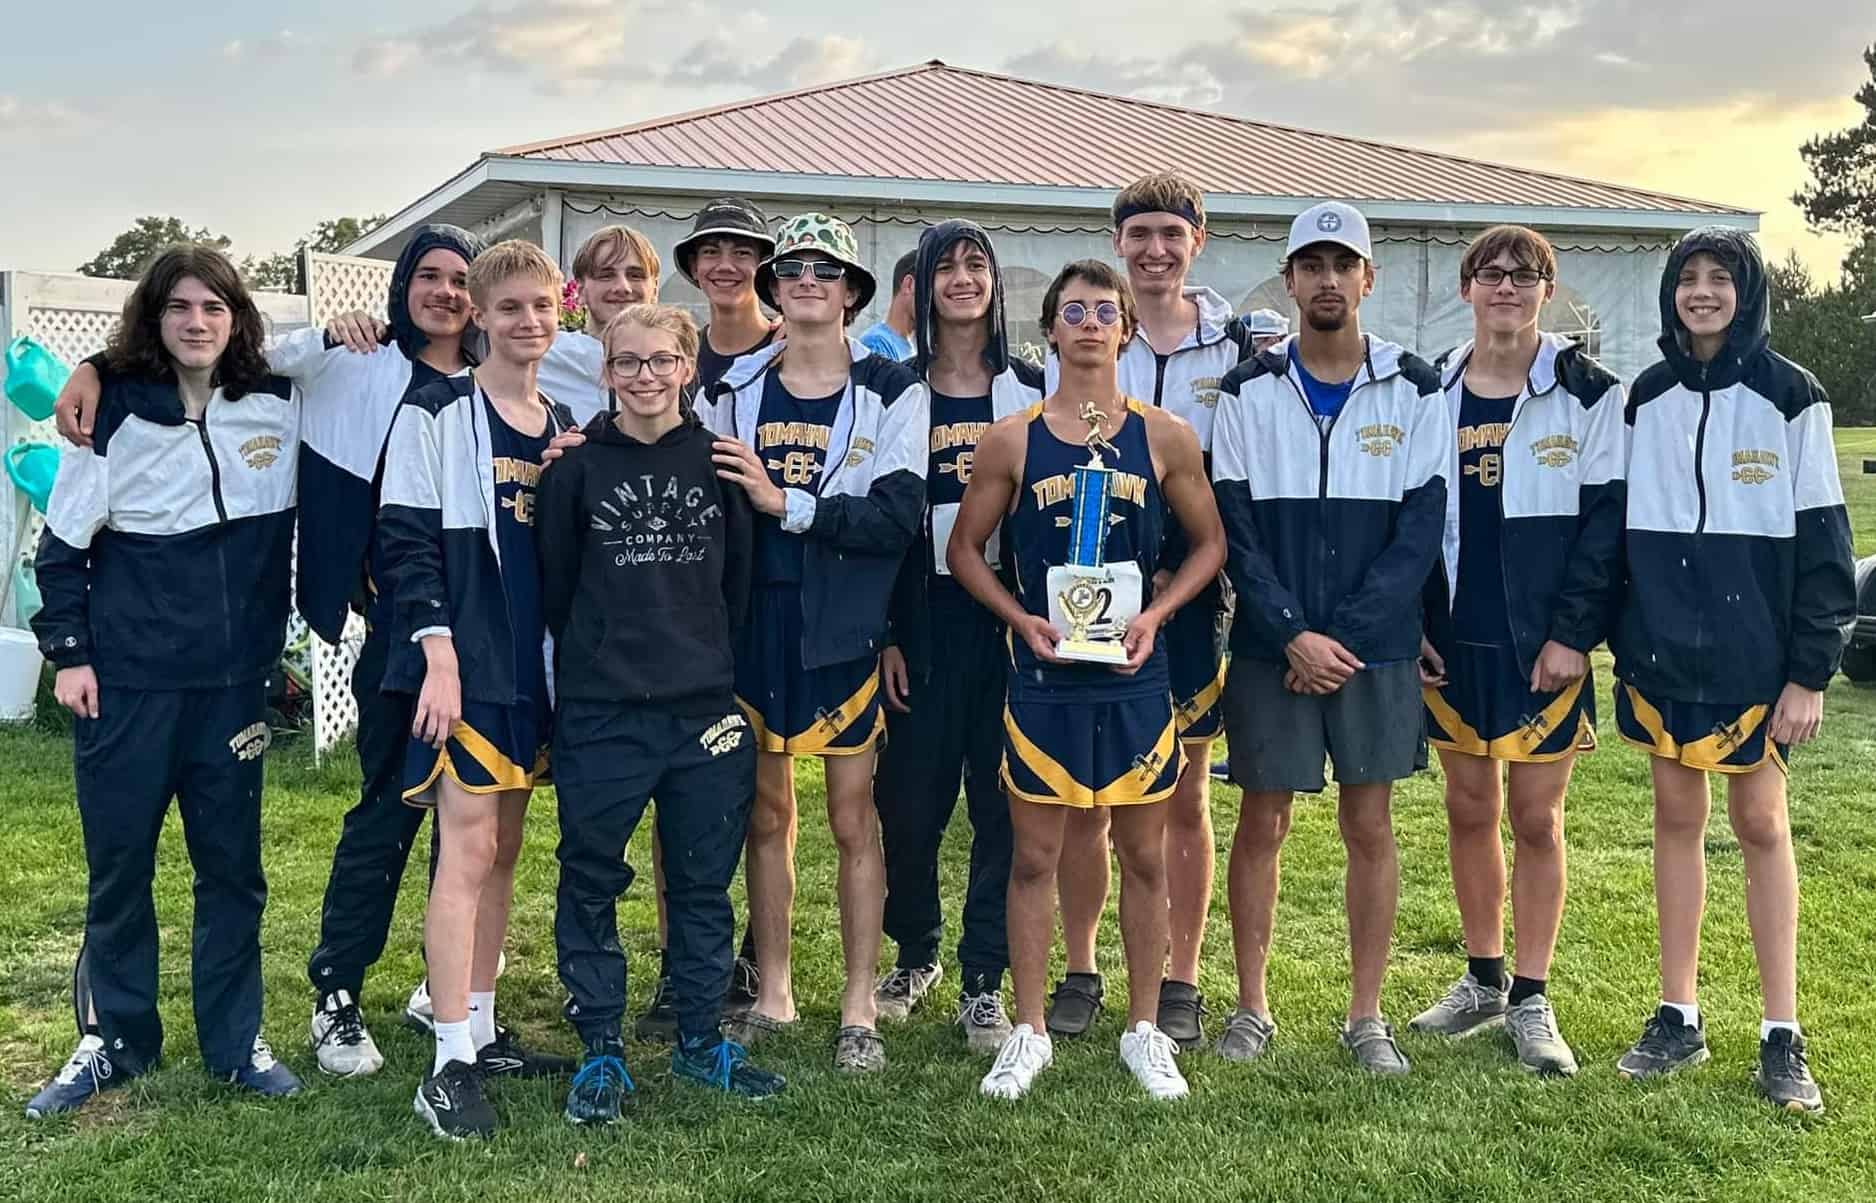 Cross country: Boys take first place, girls second at Blue Jay Invitational